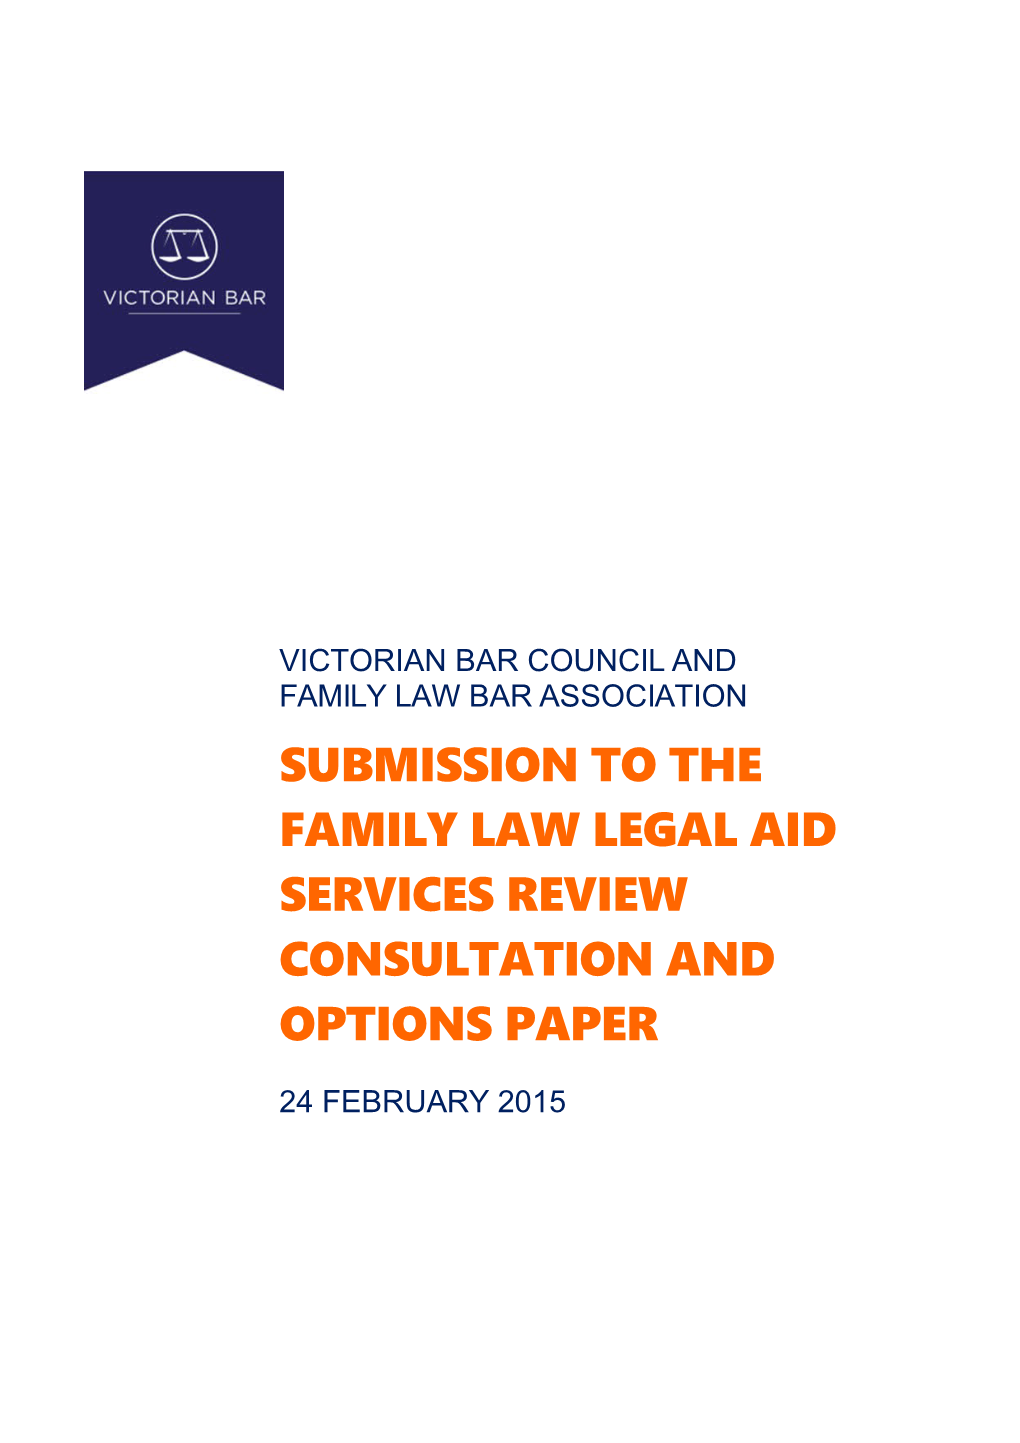 Submission to the Family Law Legal Aid Services Review Consultation and Options Paper